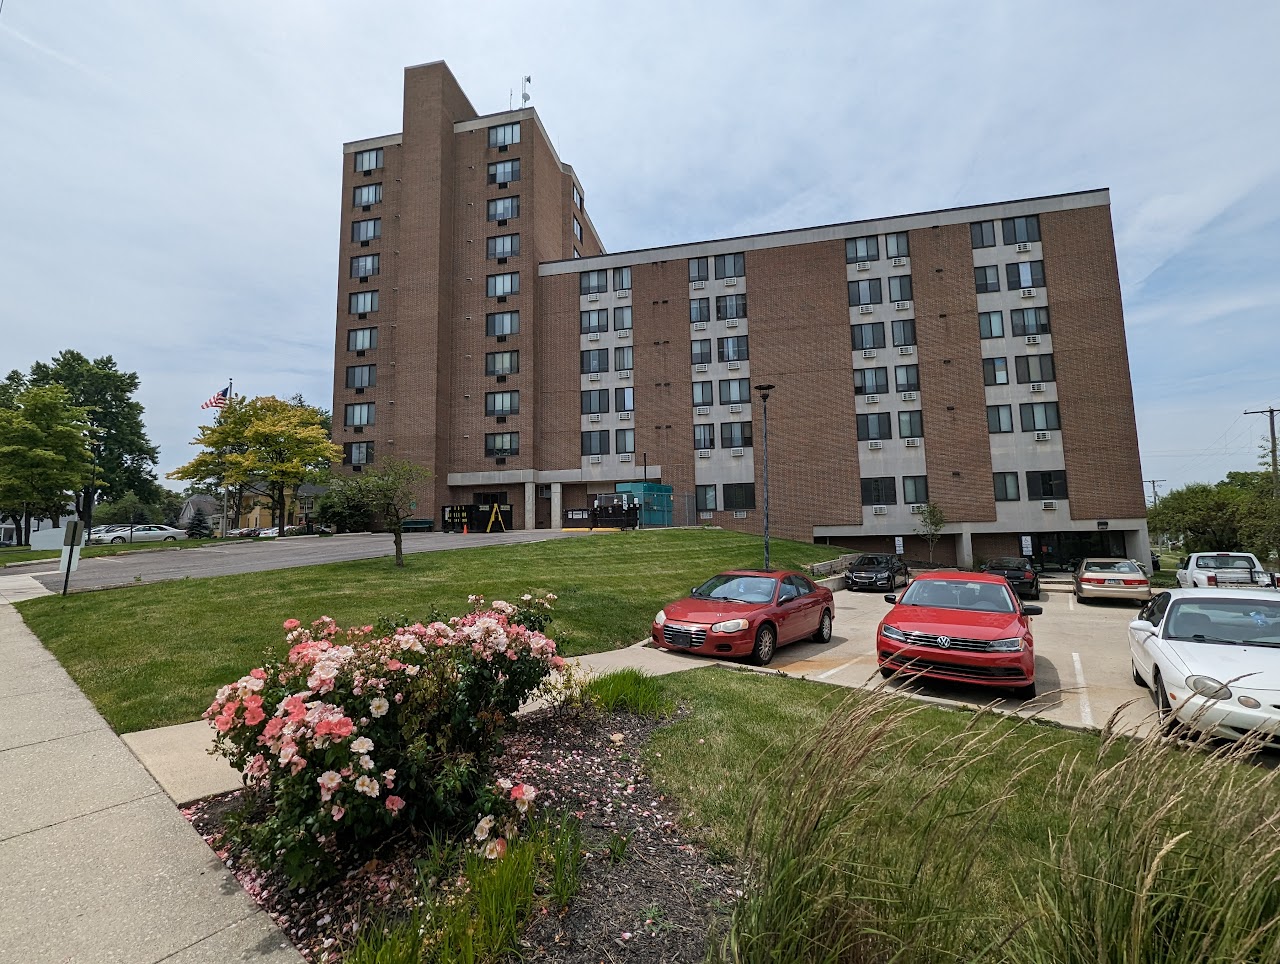 Photo of MARION ROTARY TOWERS. Affordable housing located at 400 DELAWARE AVE MARION, OH 43302